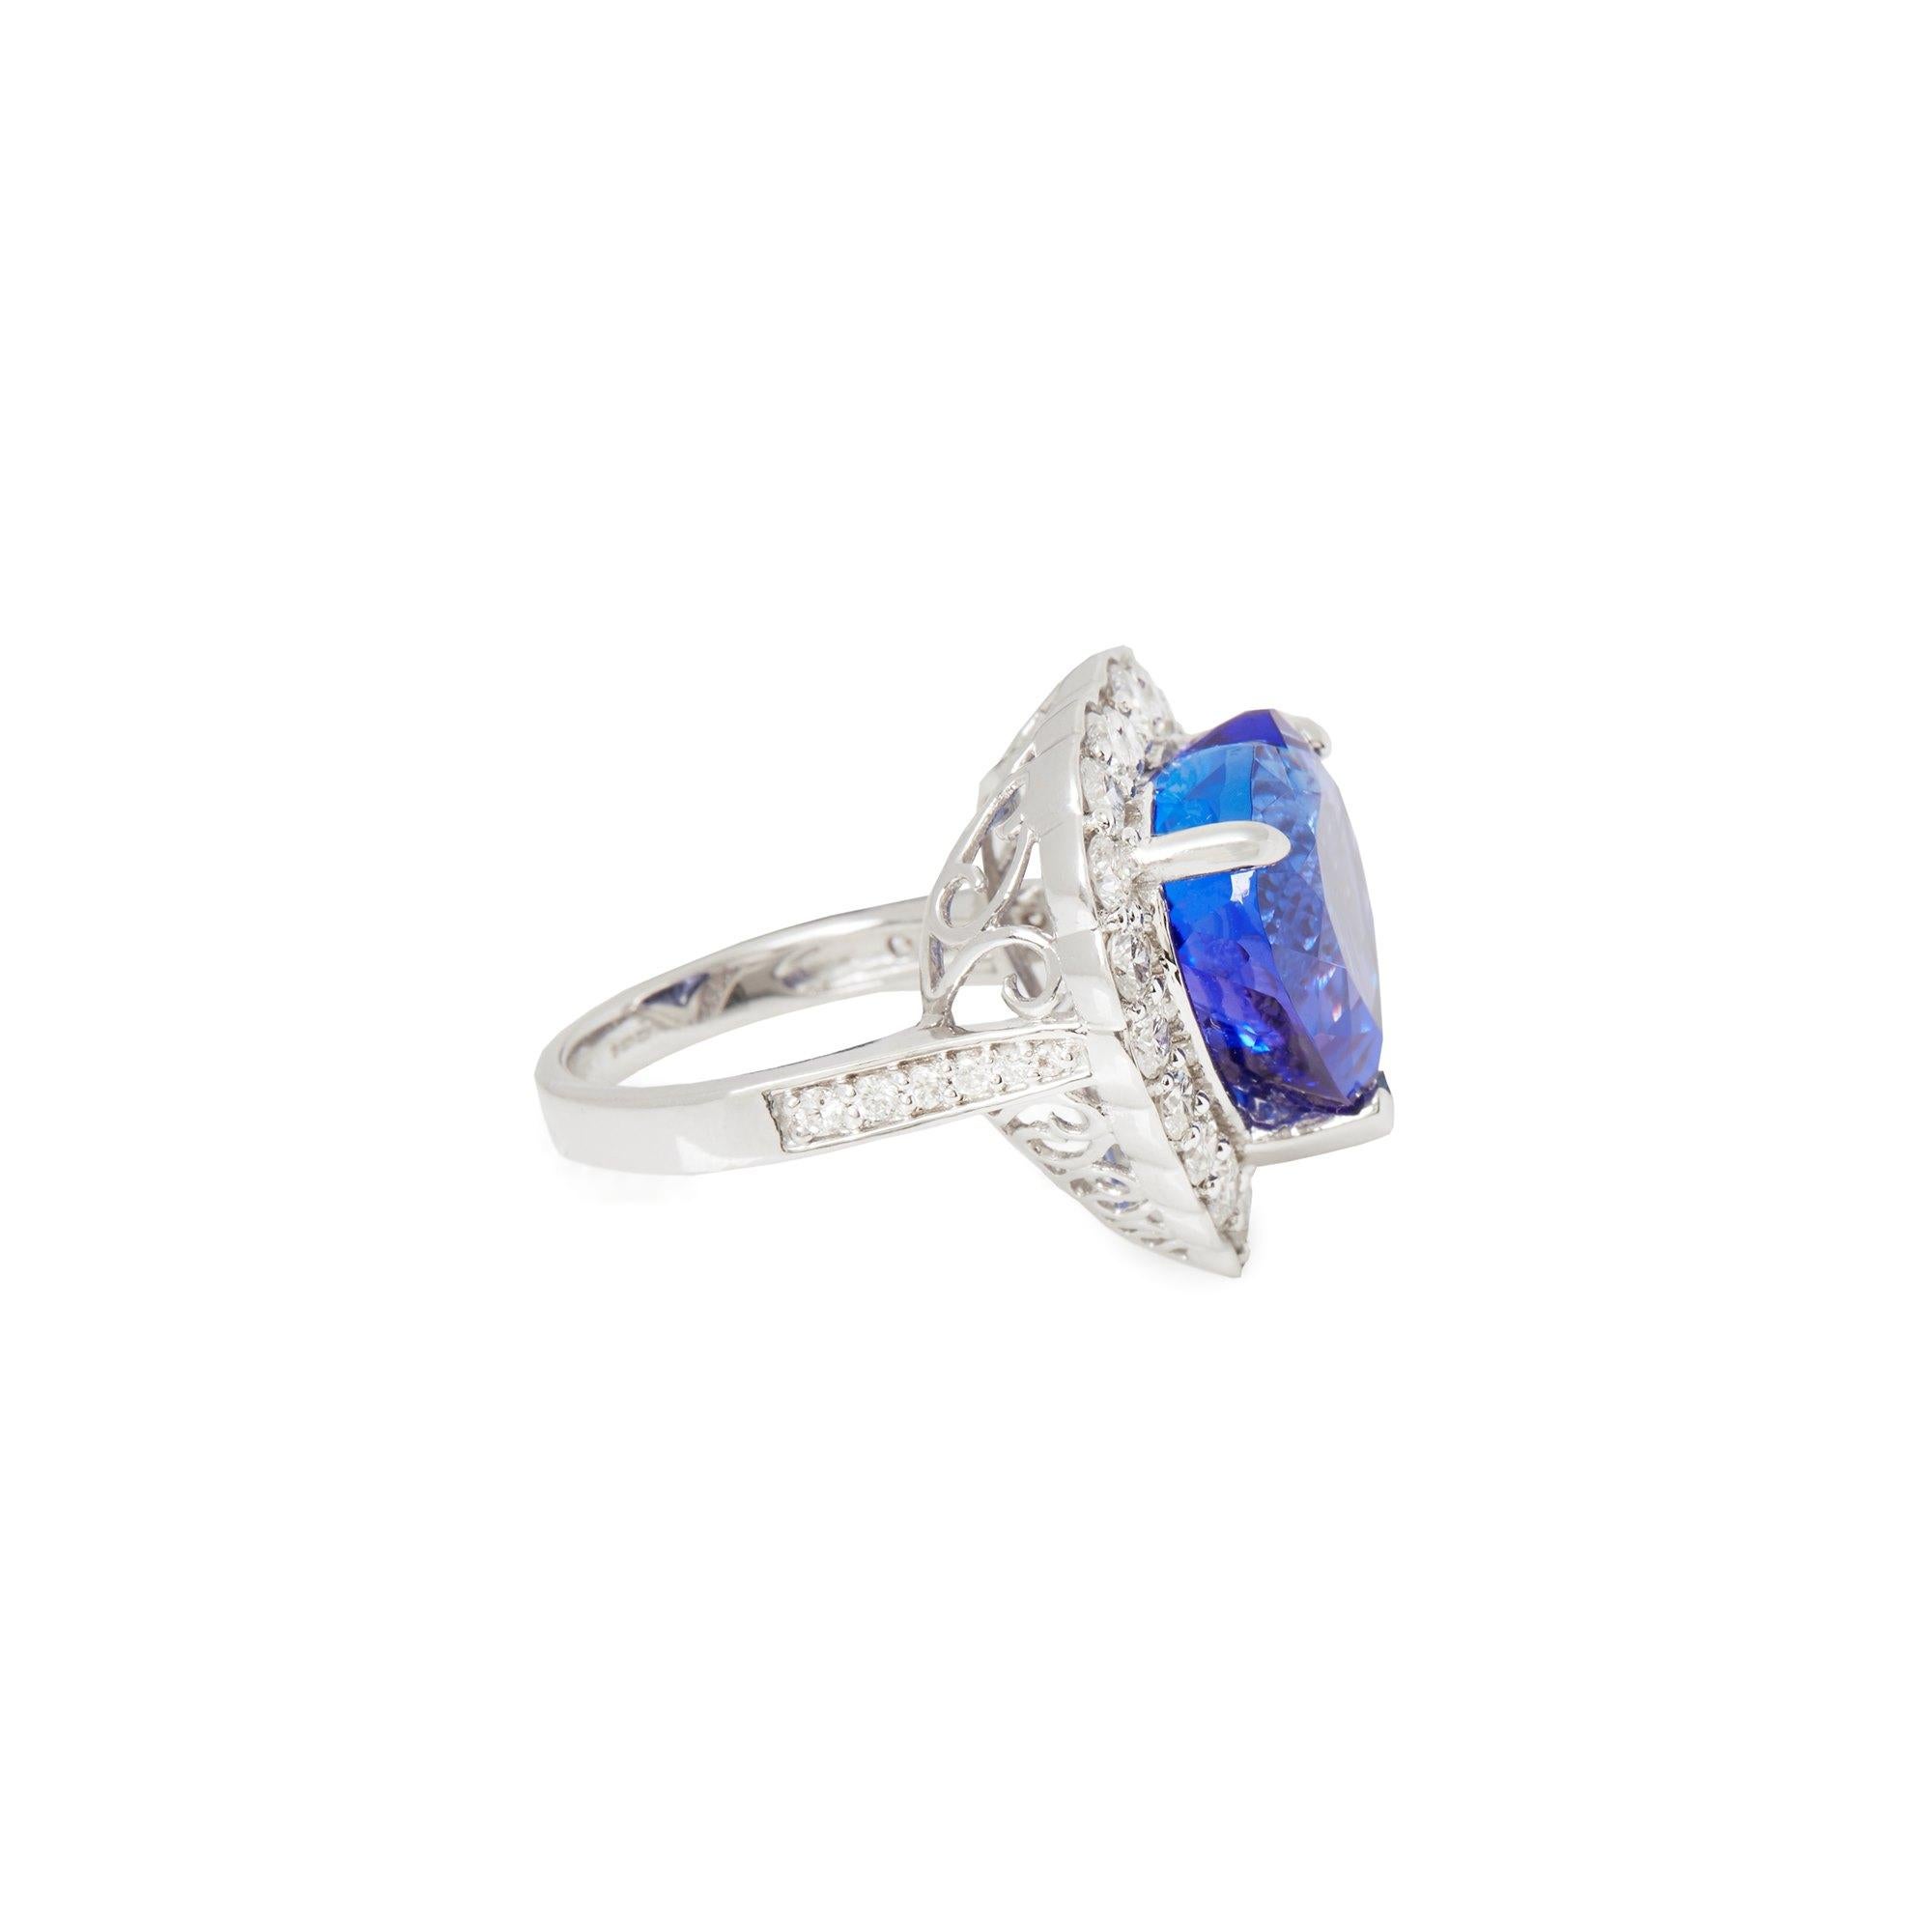 This ring designed by David Jerome is from his private collection and features one heart cut Tanzanite totalling 15.44cts sourced in the D block mine Tanzania. Set with round brilliant cut Diamonds totalling 1.74cts mounted in an 18k white gold